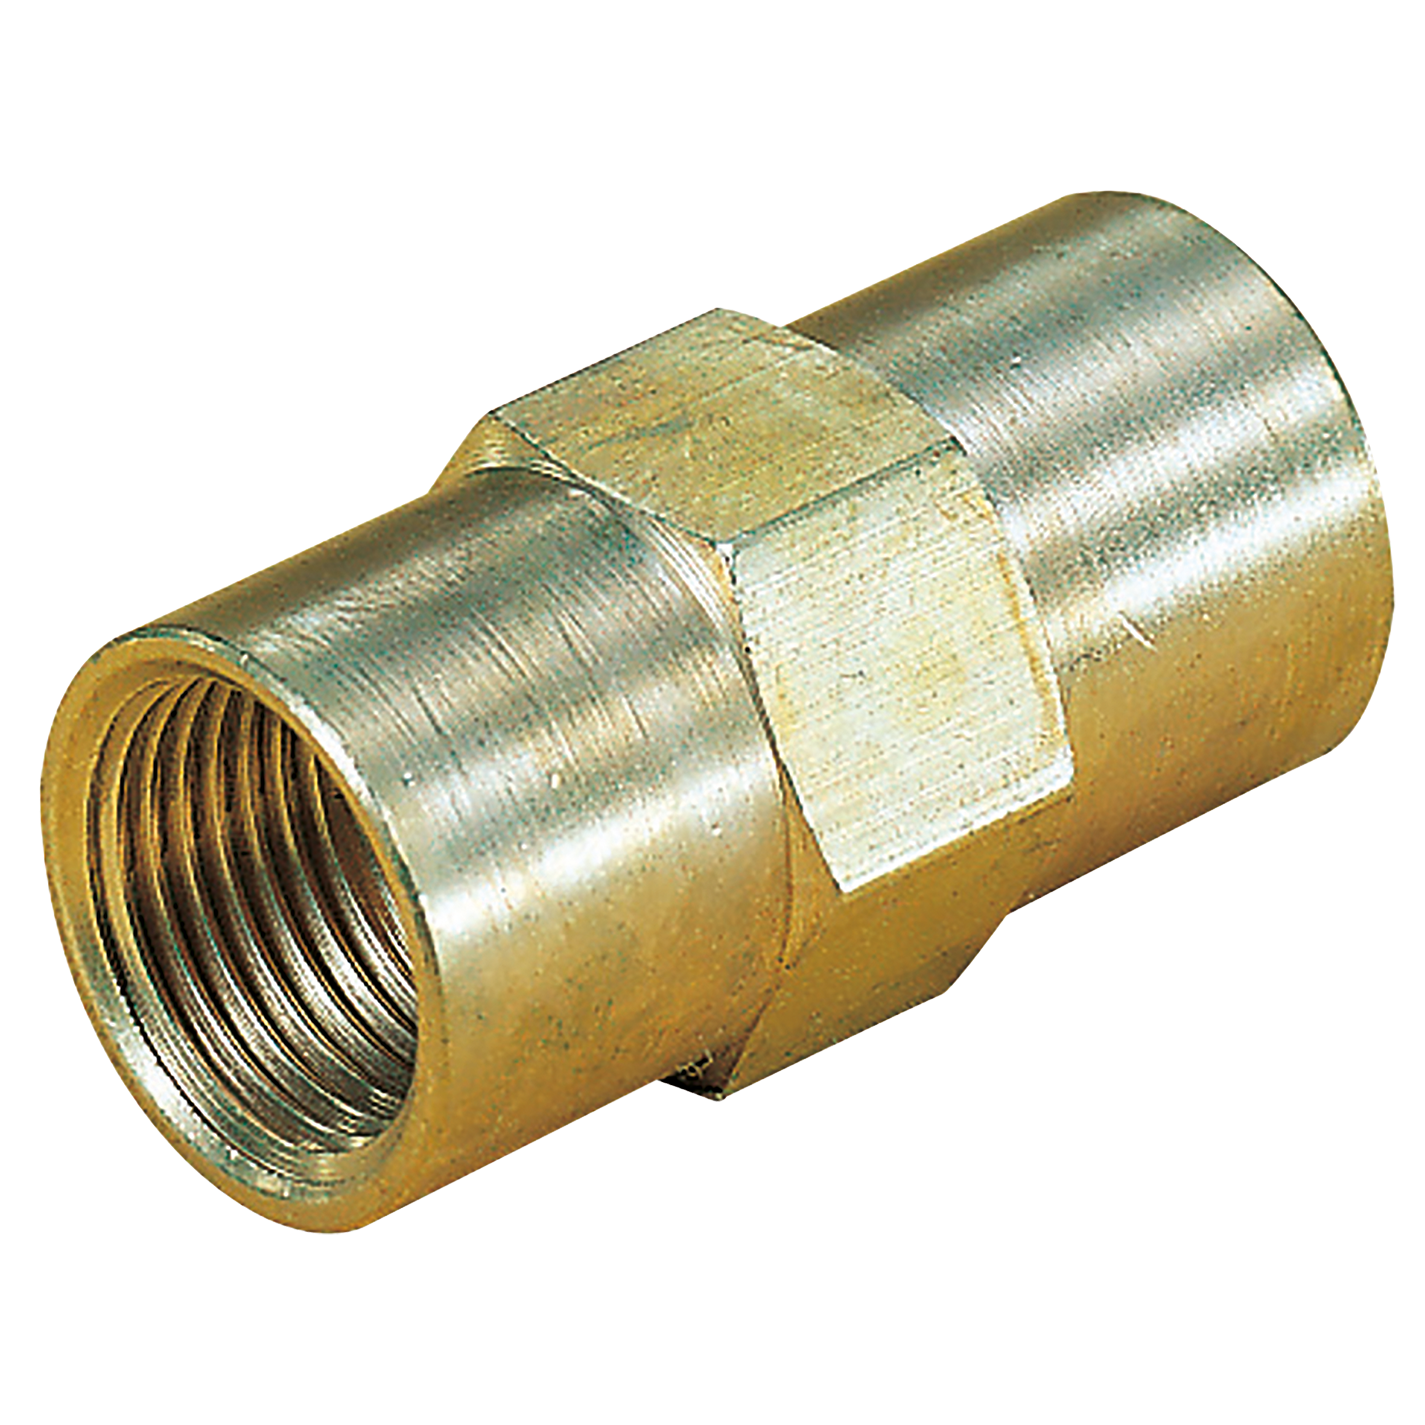 8mm OD Straight Connector